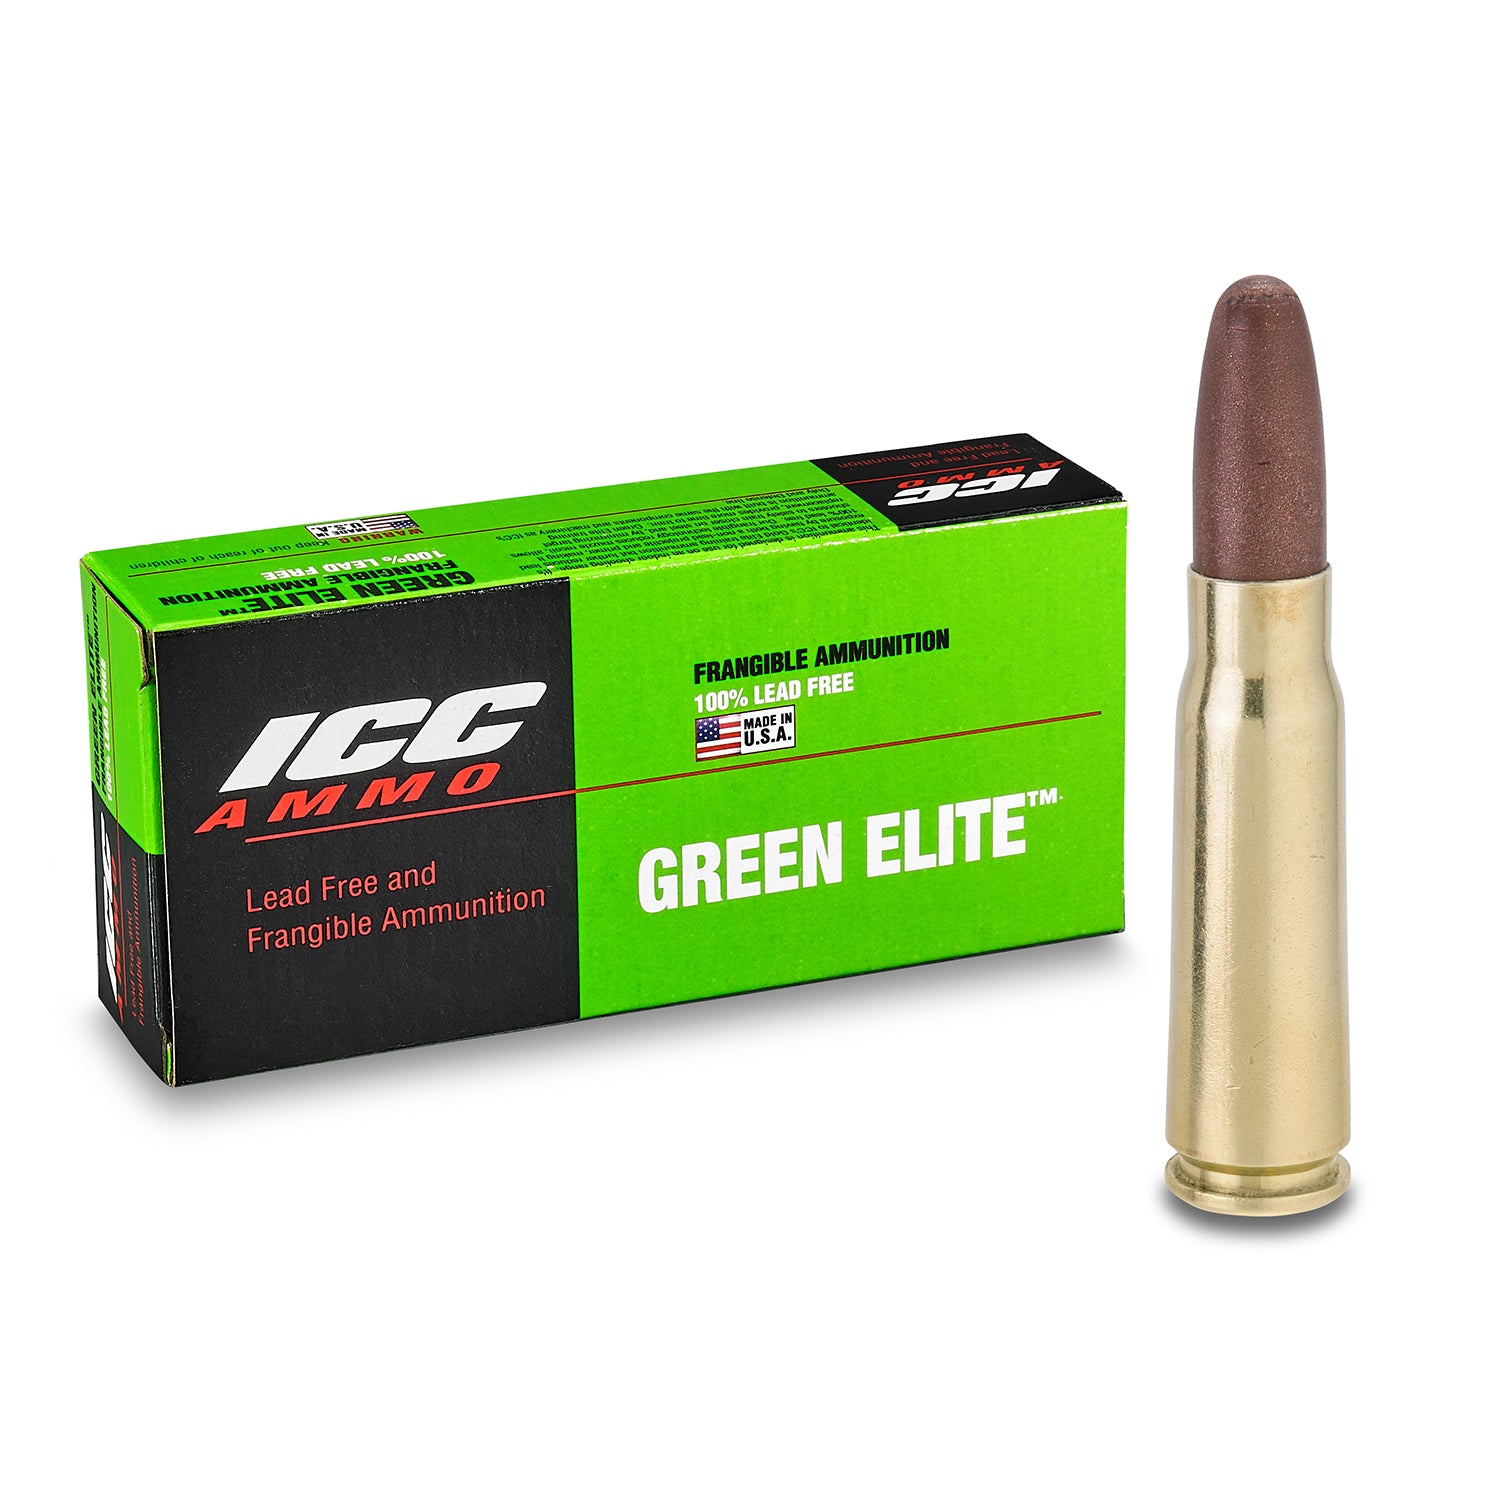 7.62 x 39mm 110 Grain 100% Lead-Free Frangible Training (CASE OF 1000 ROUNDS)